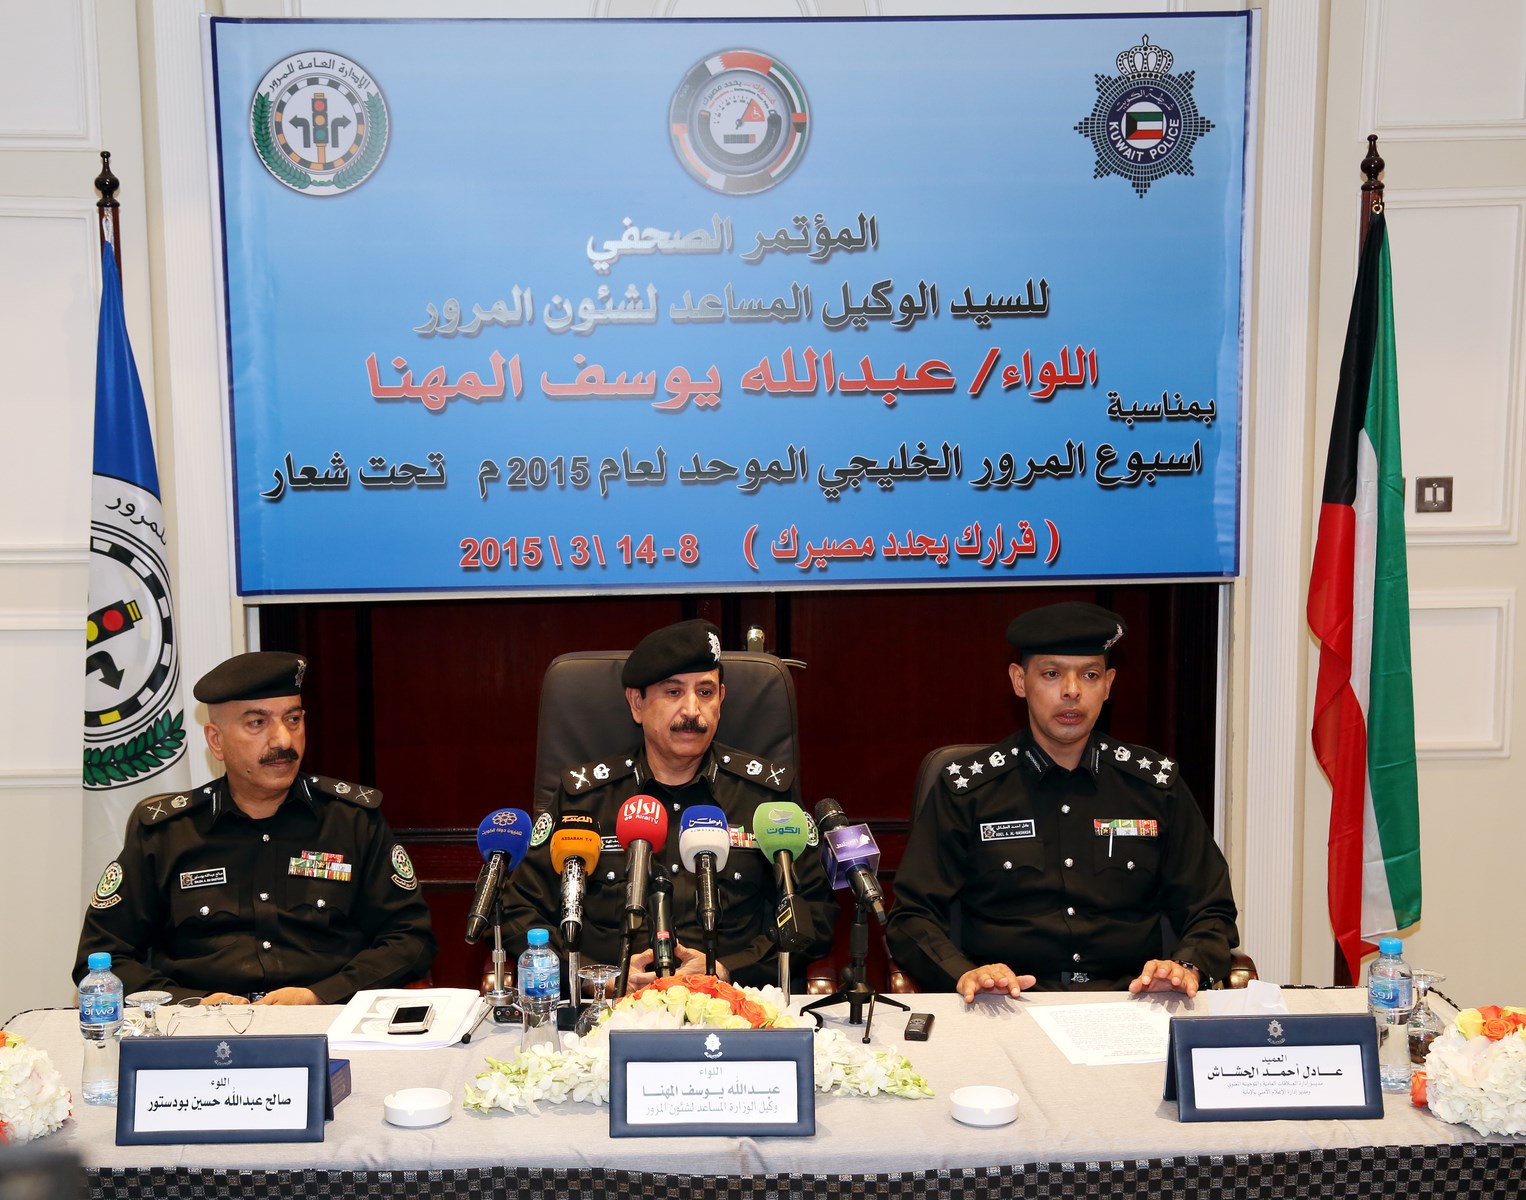 Assistant Undersecretary for Traffic Affairs at the ministry committee chief Major General Abdullah Al-Muhanna during the Press Conference